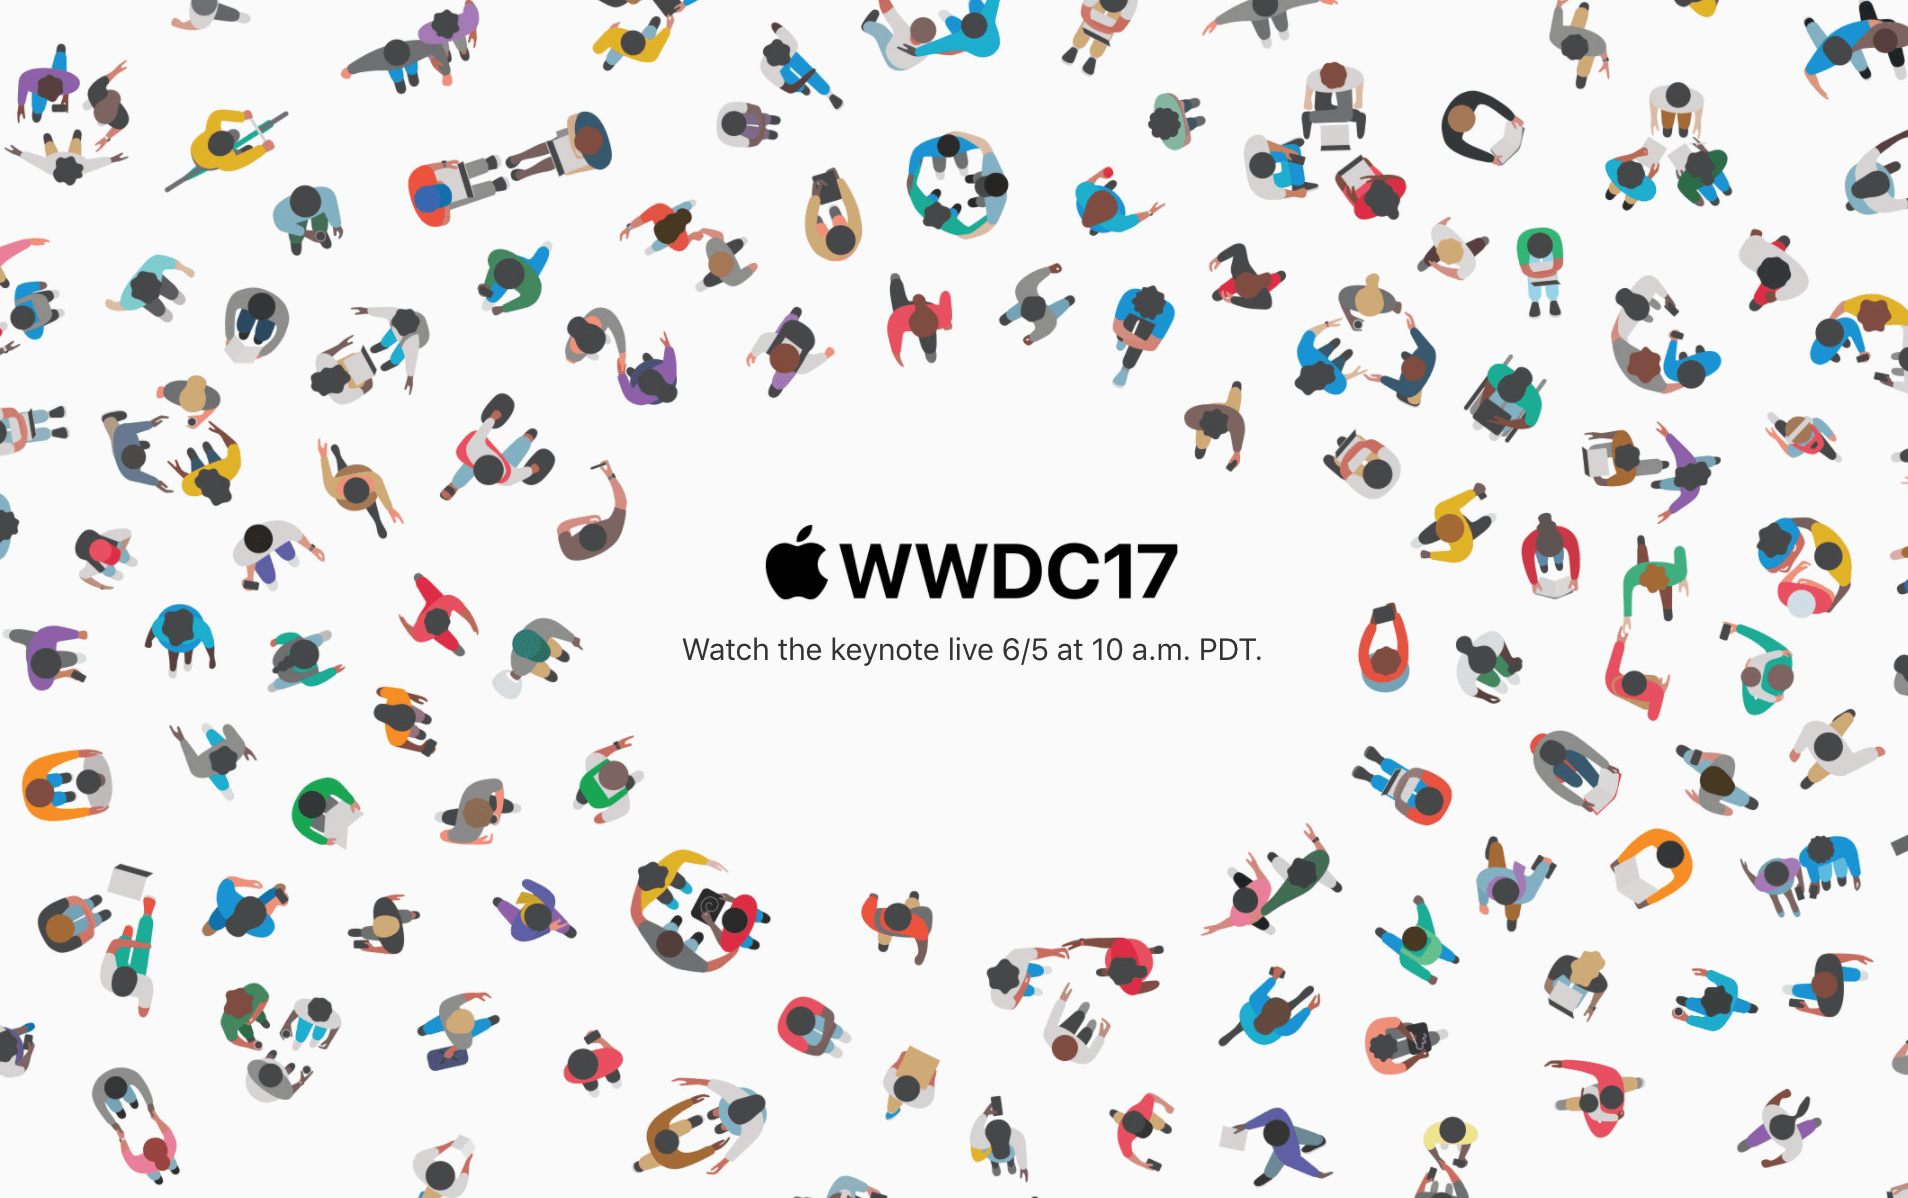 Don't miss out on WWDC 2017!